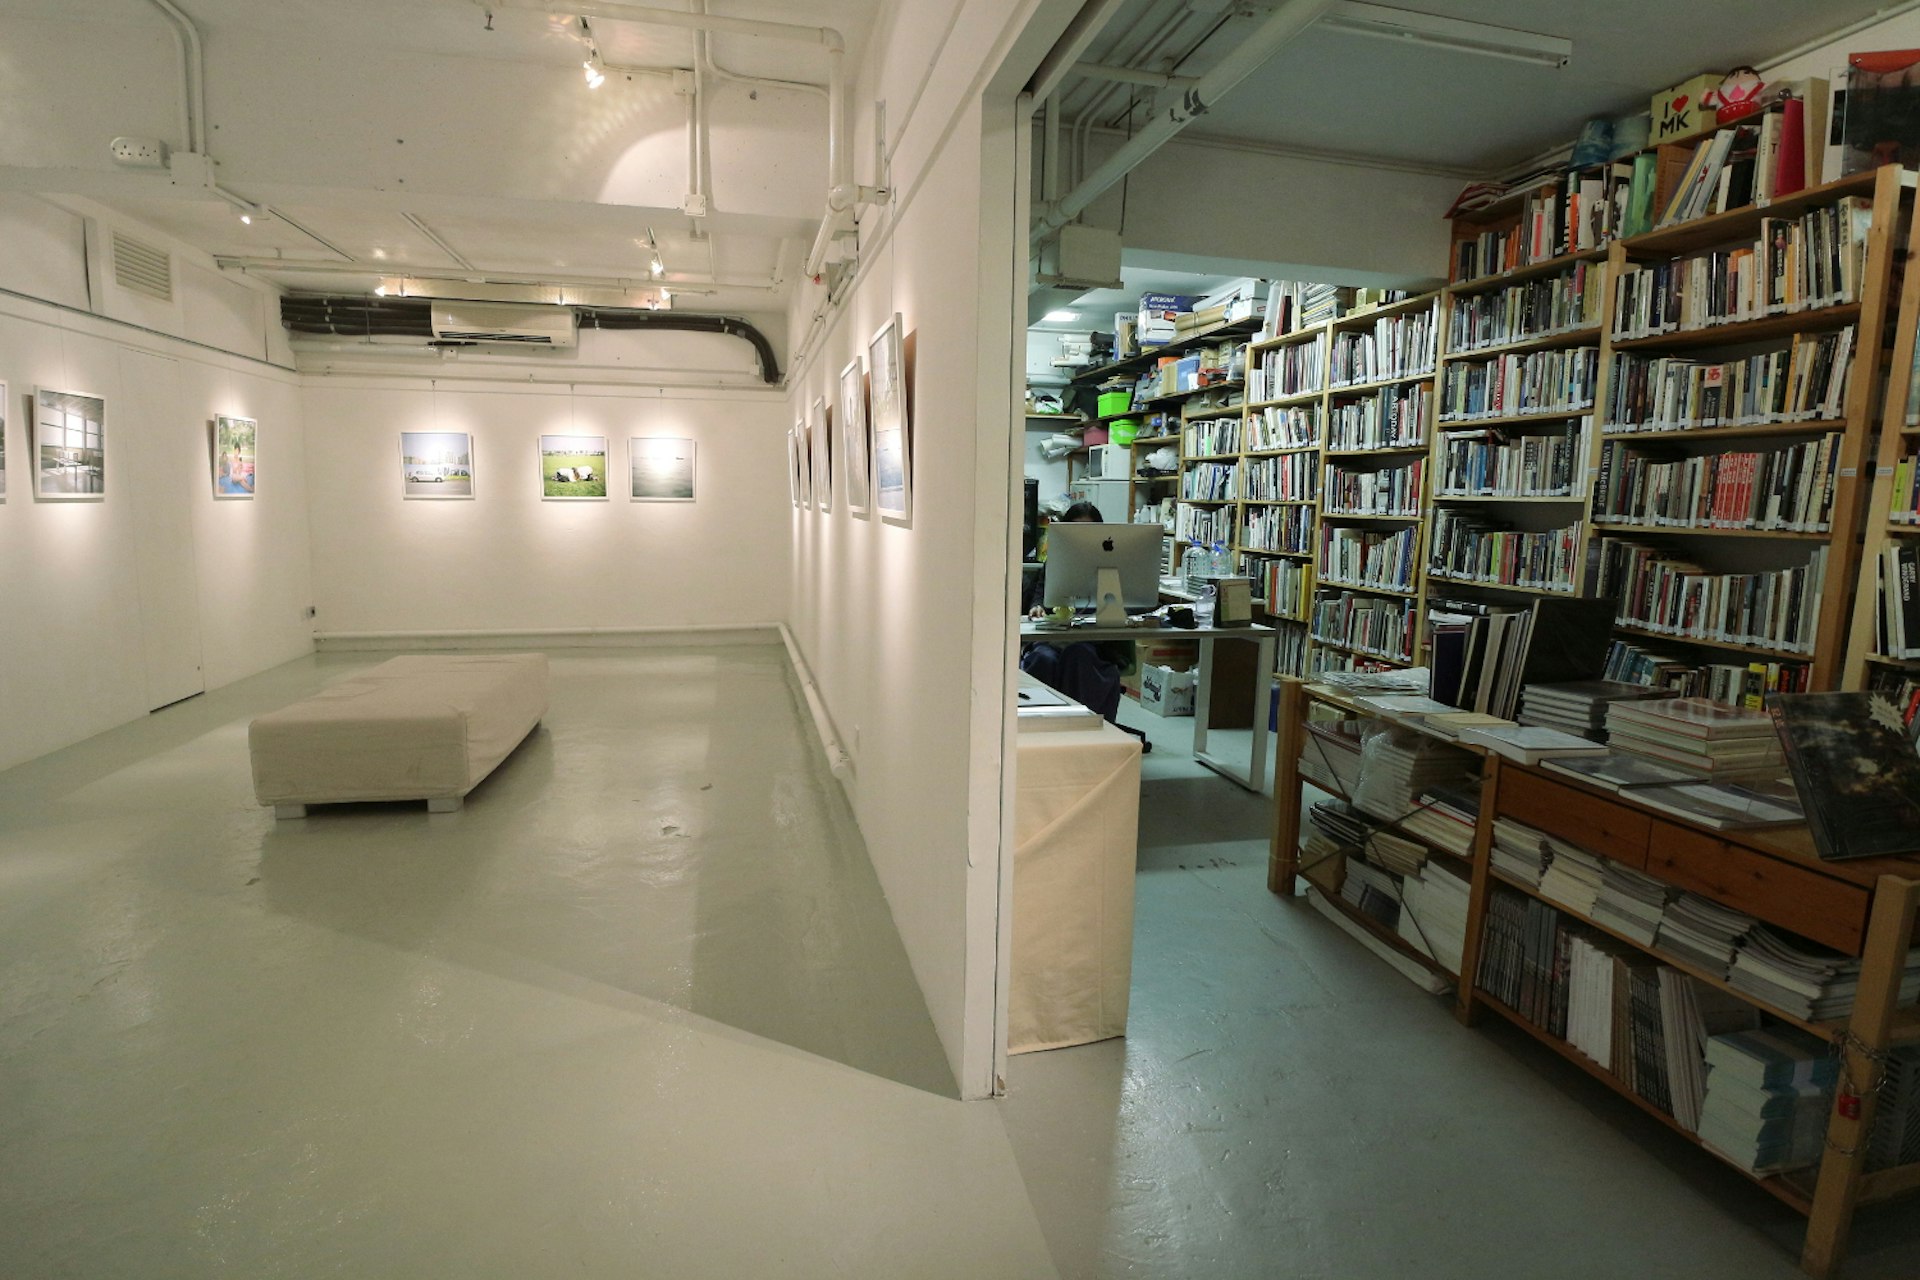 Lumen Visum photography exhibition and library. Image by Piera Chen / Lonely Planet